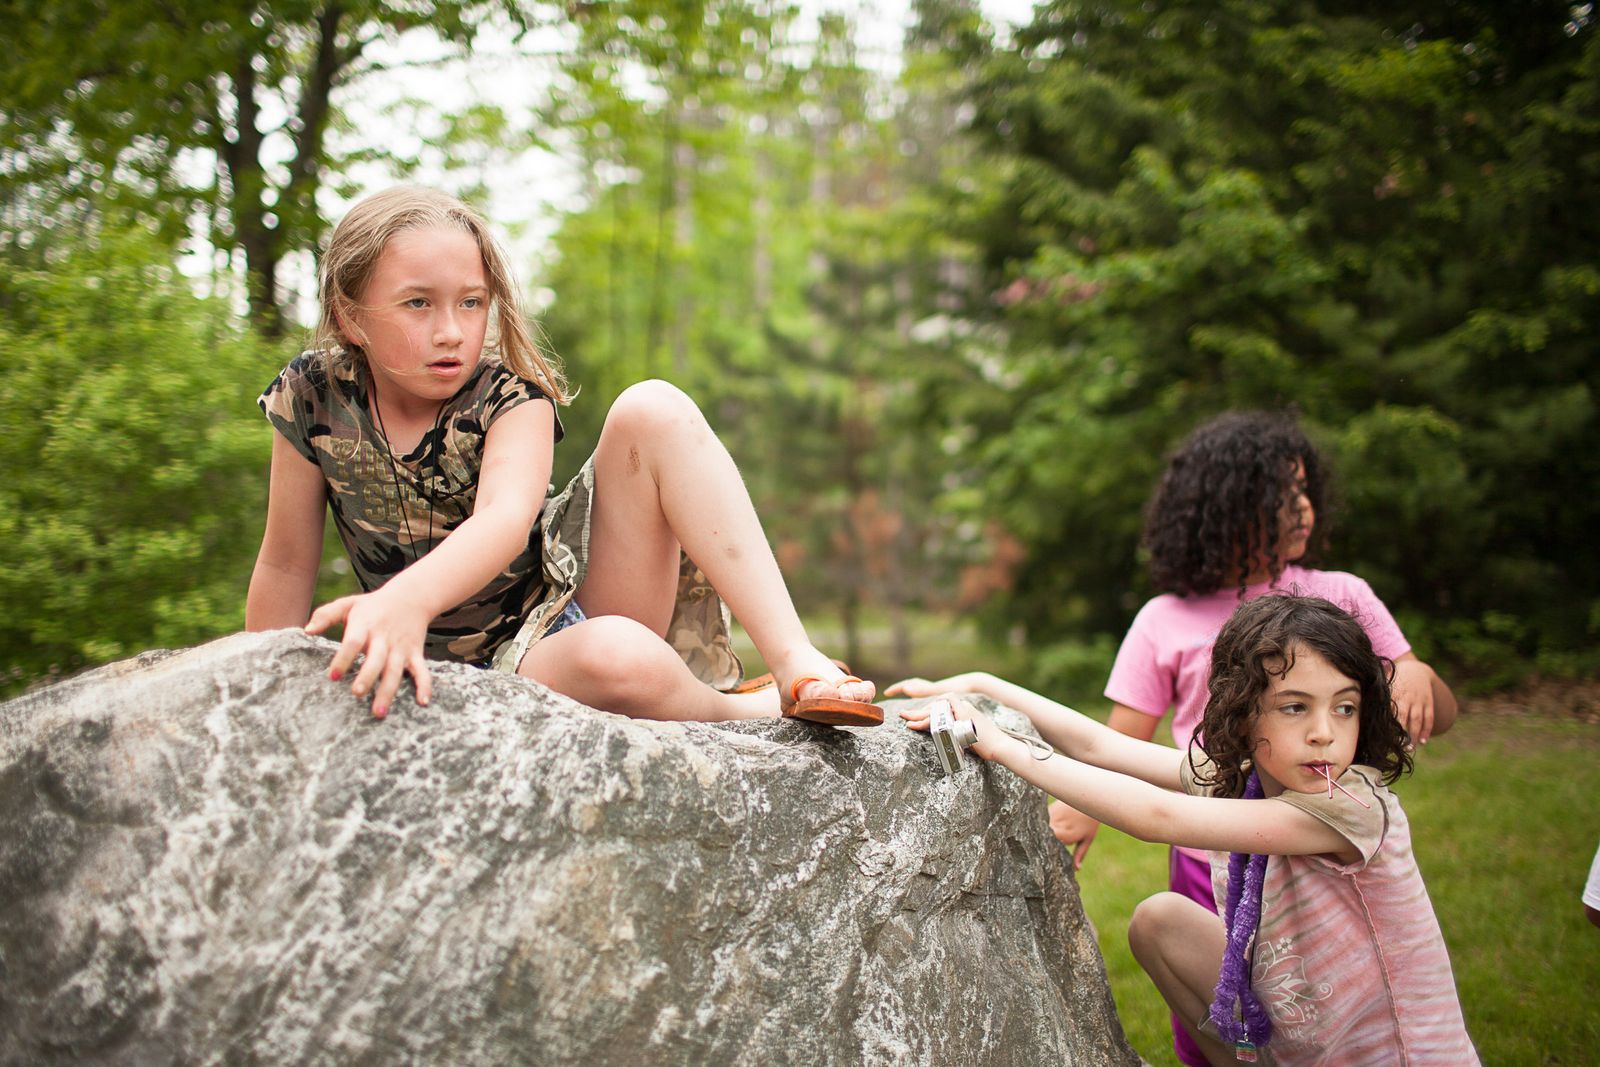 © Lindsay Morris - 10-year-old Ryan and her friends participate in typical summer camp activities (2011).